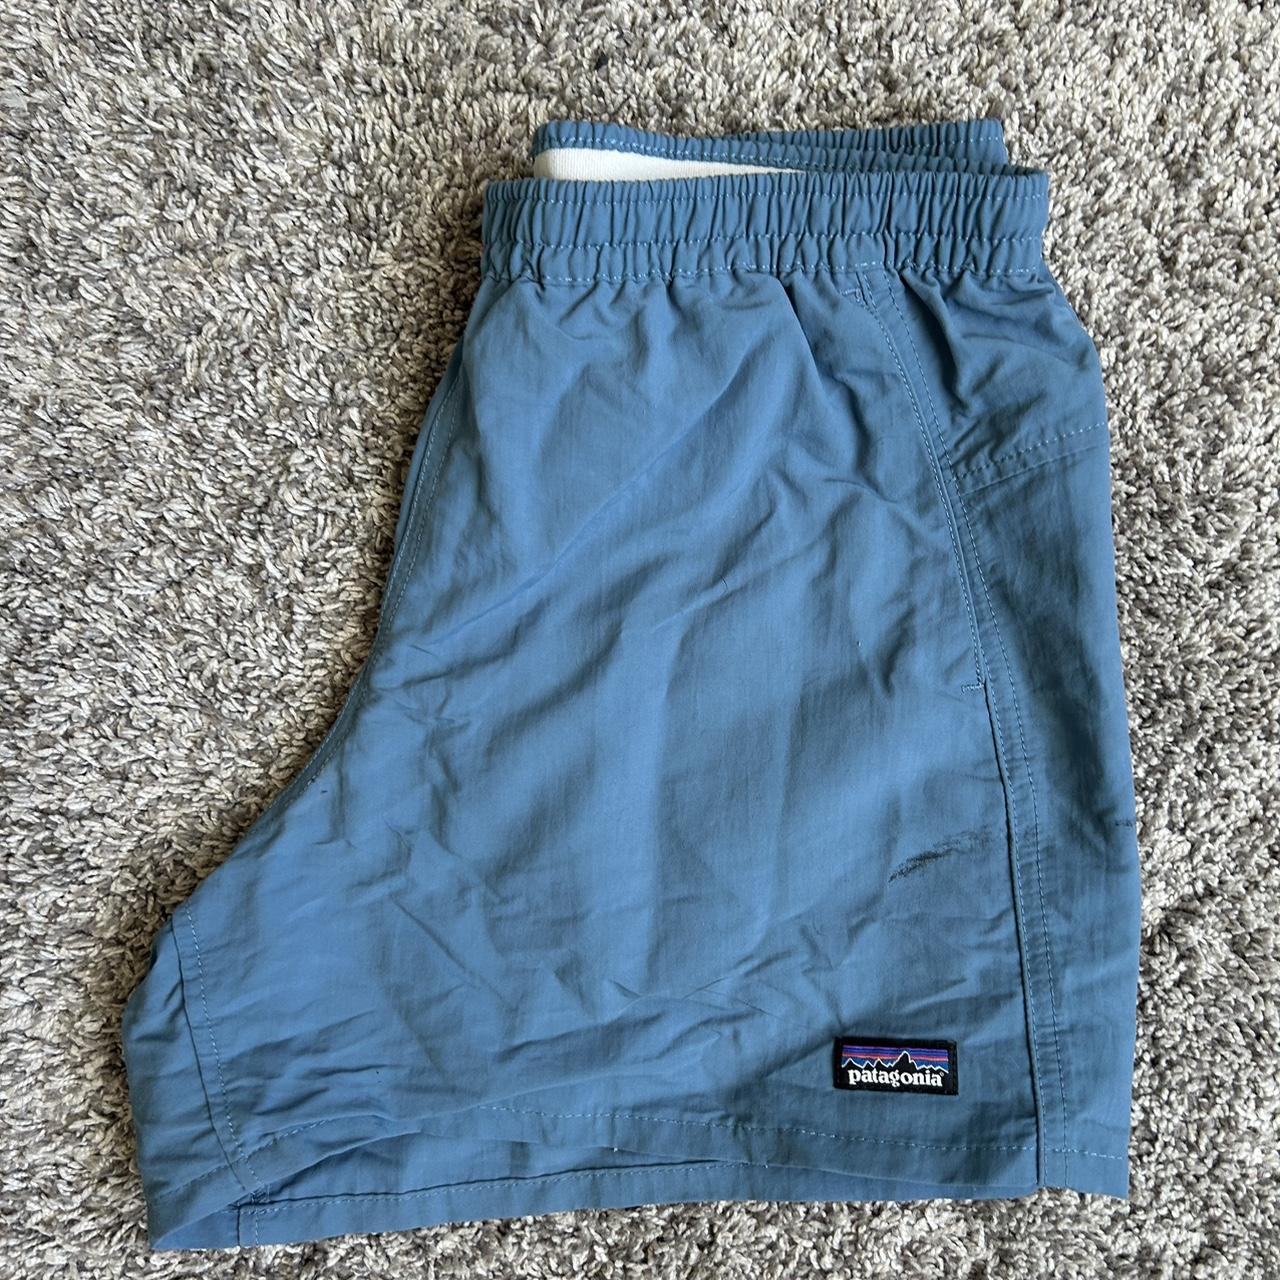 Size Small Sky blue Patagonia women’s shorts| Minor... - Depop